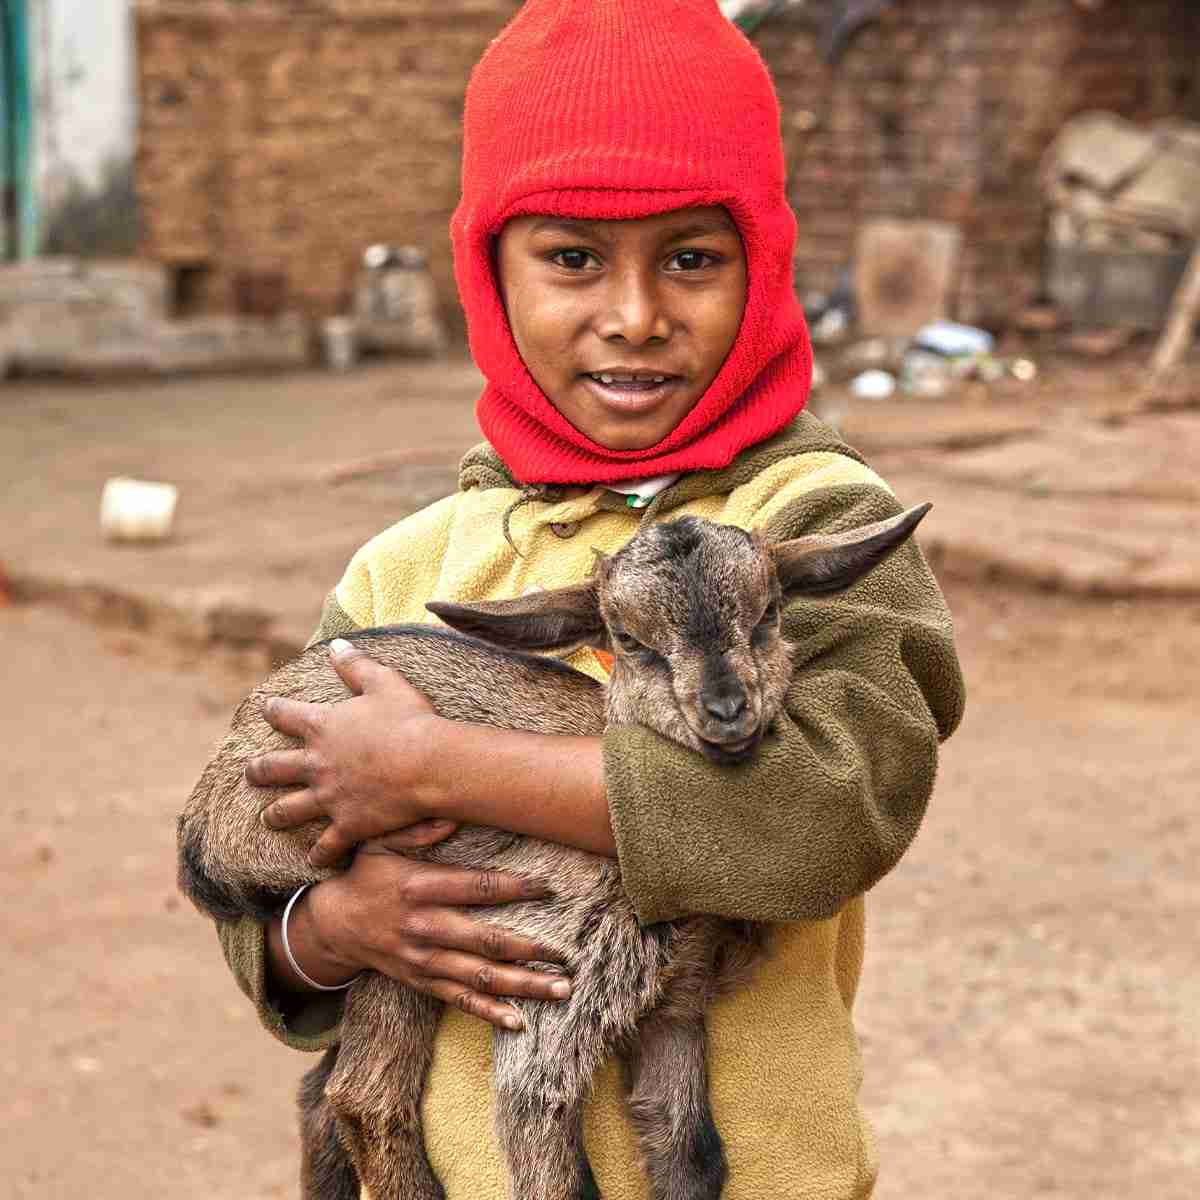 This boy's family received income providing goats from gift distribution